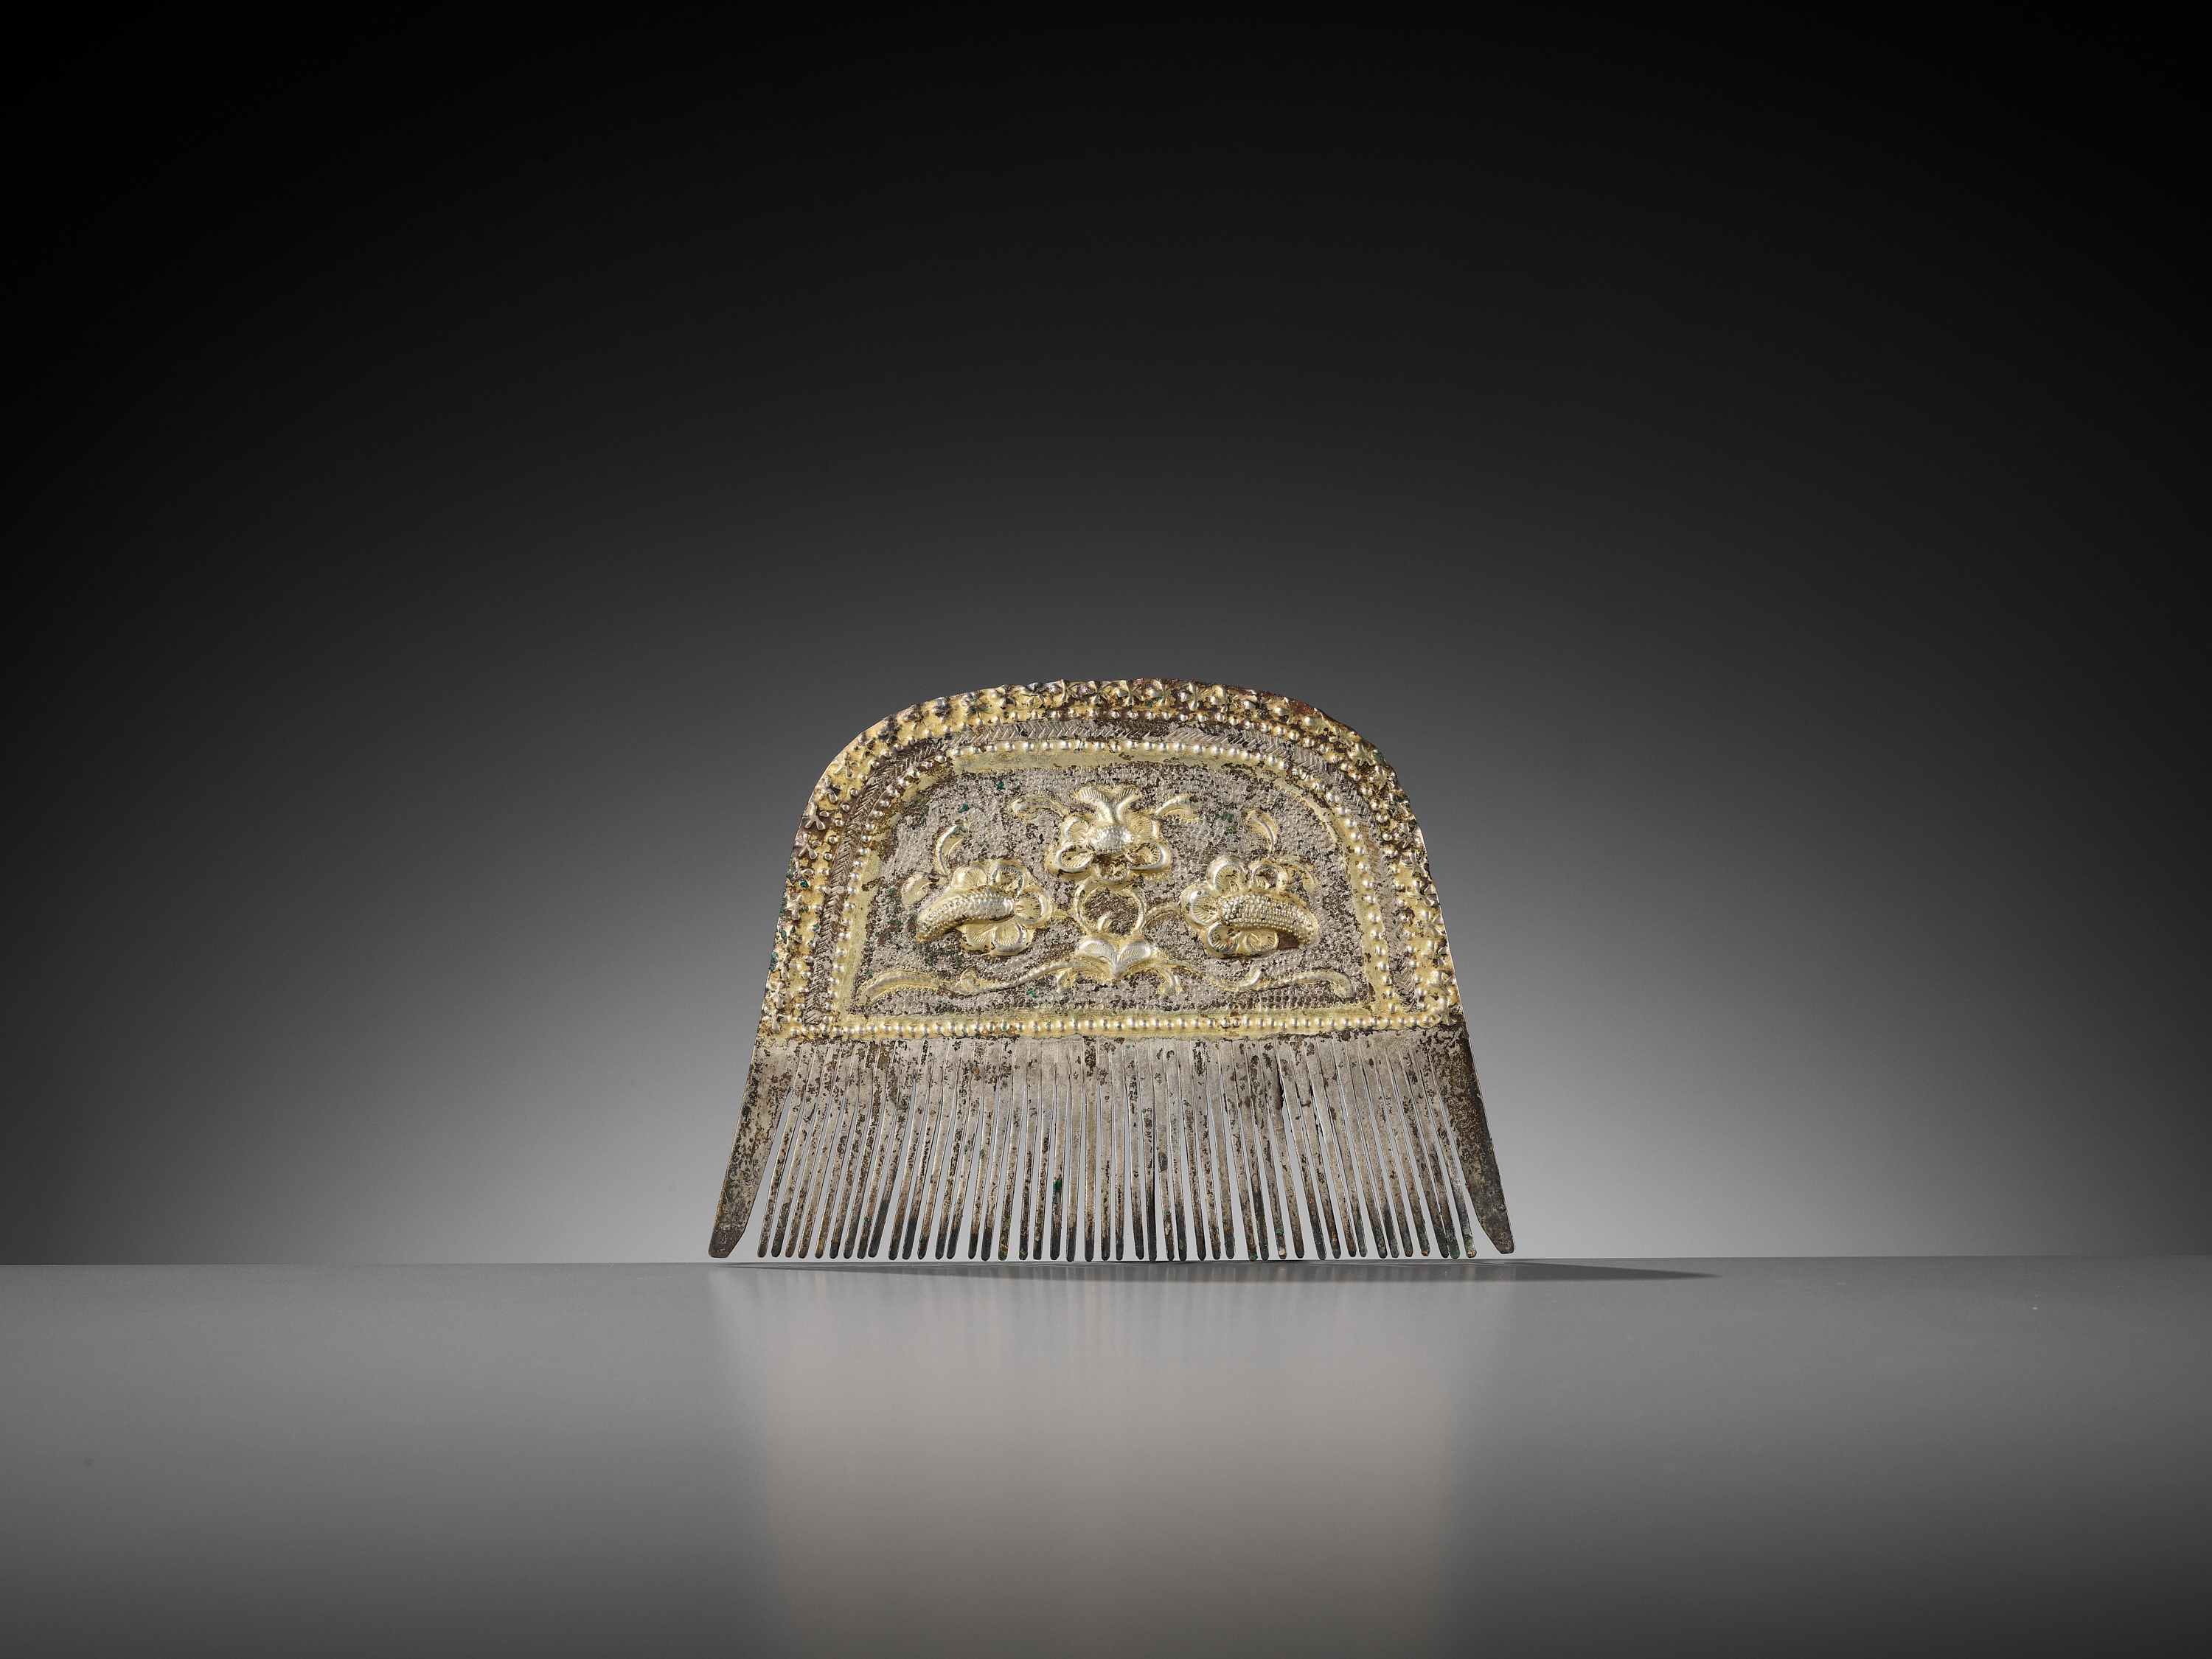 A PARCEL-GILT SILVER COMB, TANG DYNASTY - Image 11 of 12